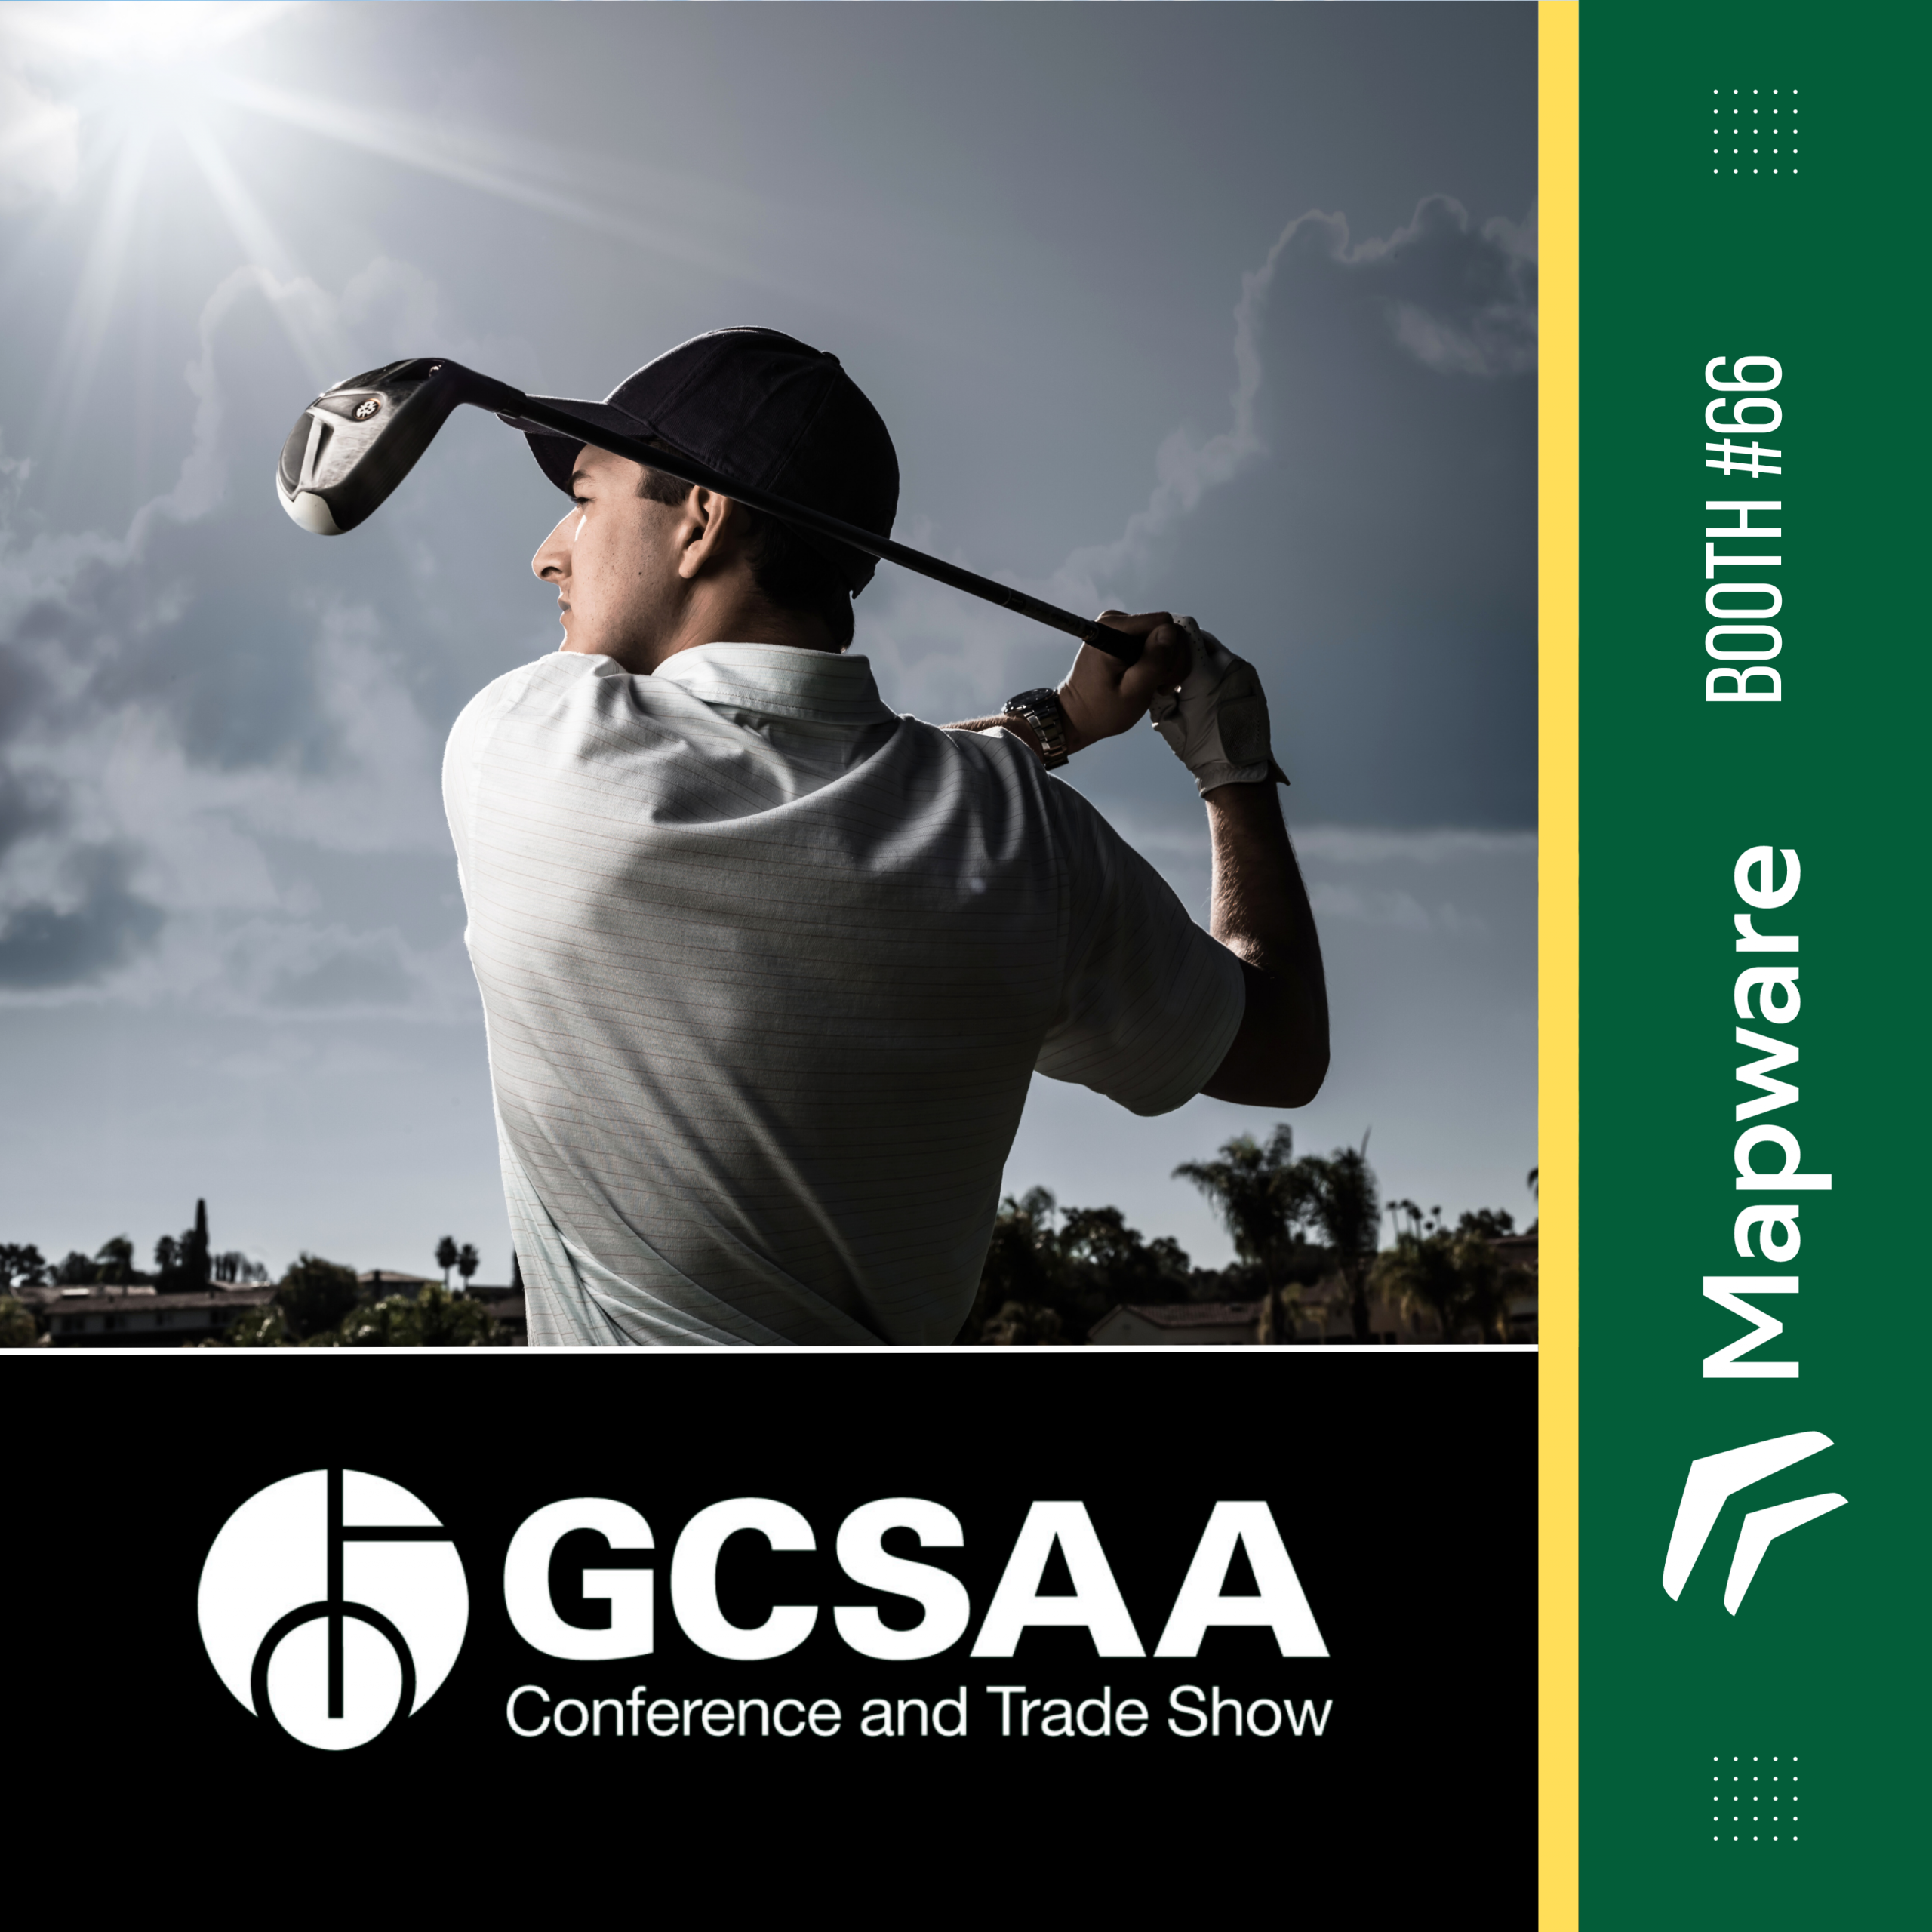 Mapware is exhibiting at Booth #66 of the GCSAA Conference and Trade Show